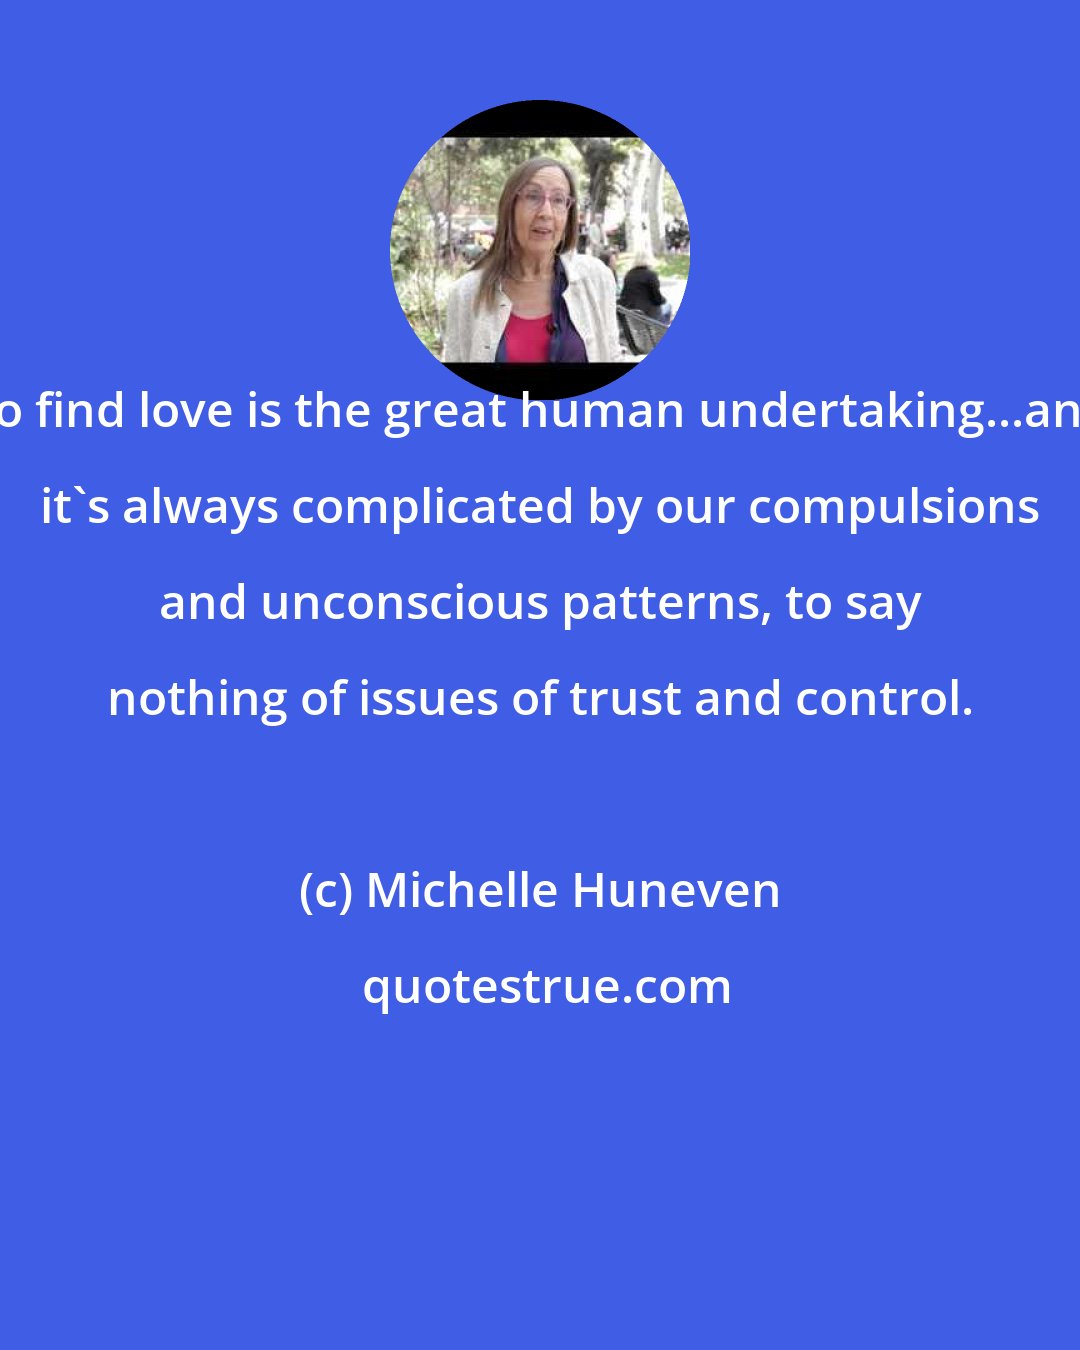 Michelle Huneven: To find love is the great human undertaking...and it's always complicated by our compulsions and unconscious patterns, to say nothing of issues of trust and control.